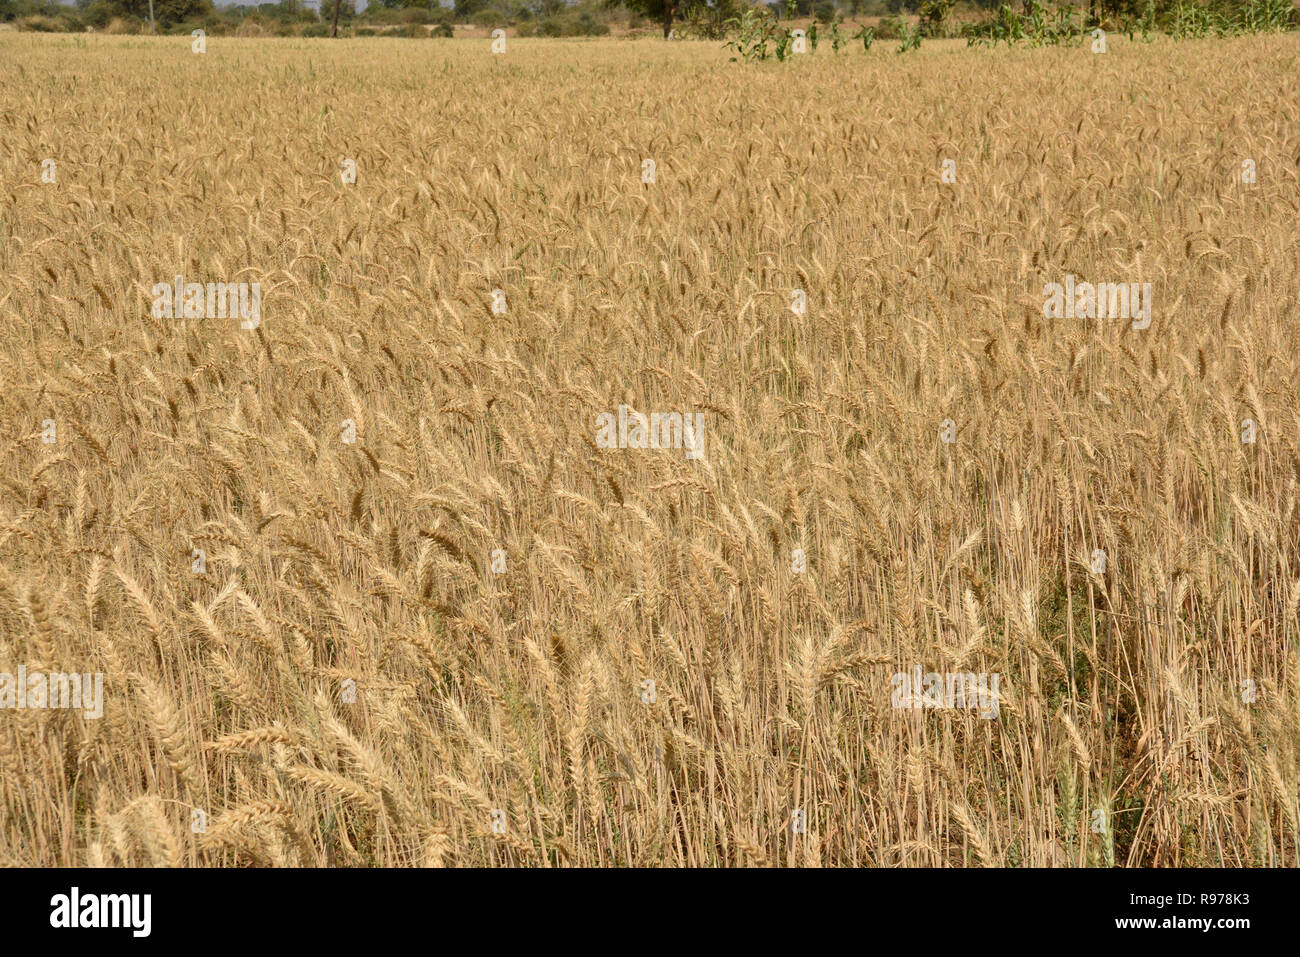 Valuable well established delightfully fragrant wheat plantation with other crops in countryside of rural agricultural fertile land of Gujarat India. Stock Photo